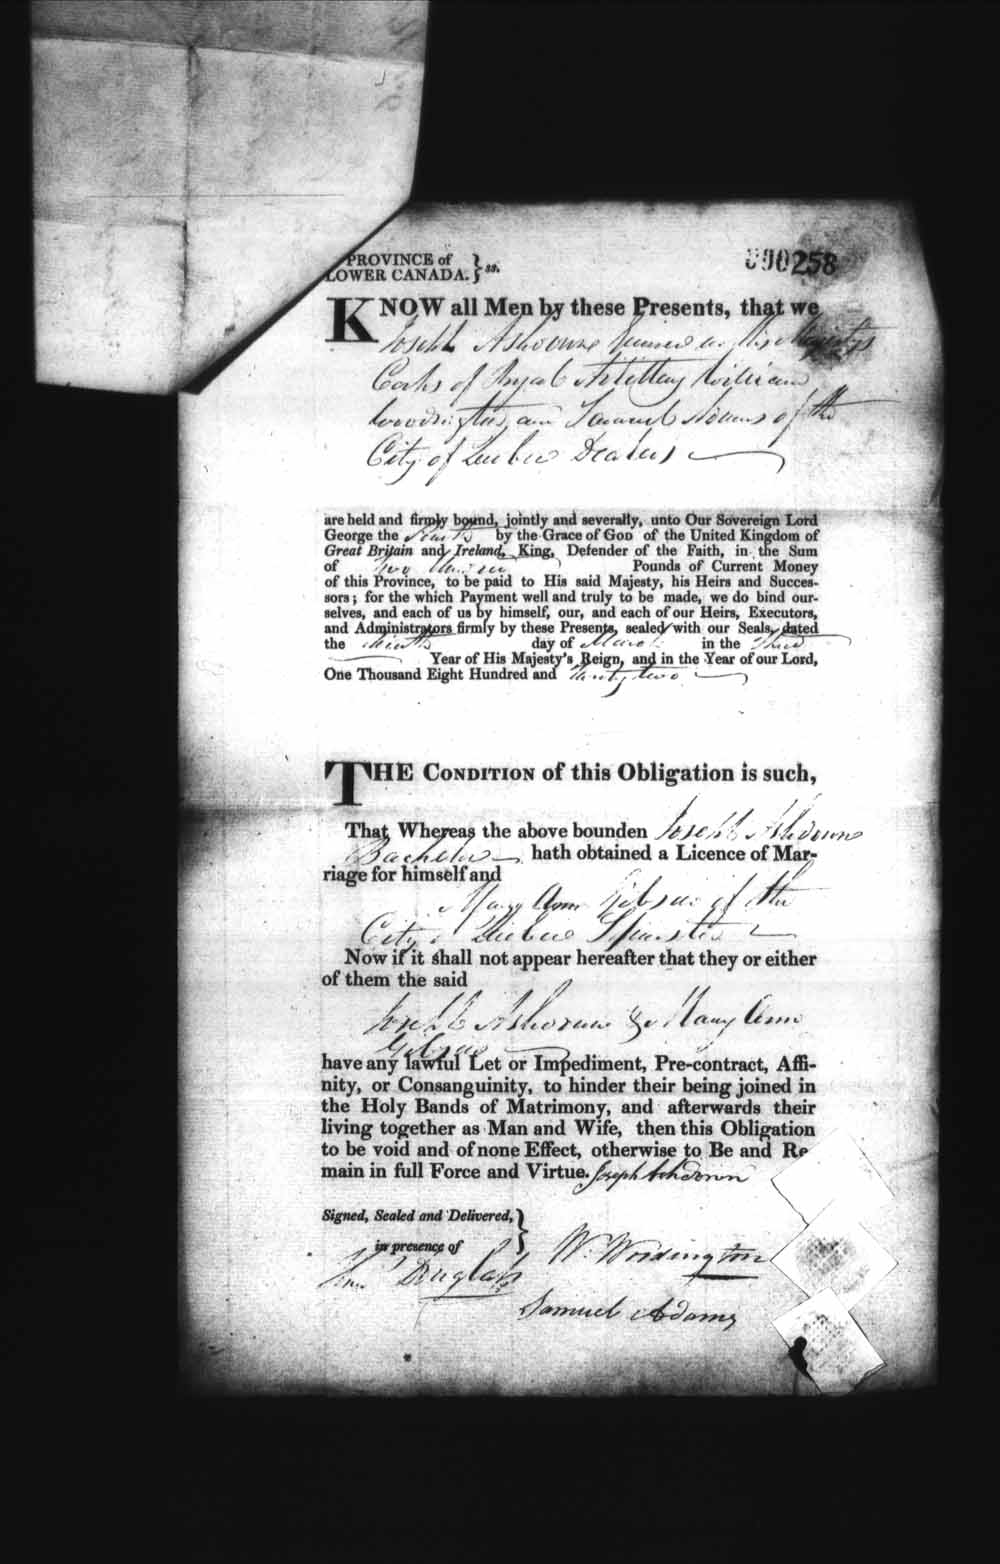 Digitized page of Upper and Lower Canada Marriage Bonds (1779-1865) for Image No.: e008236123